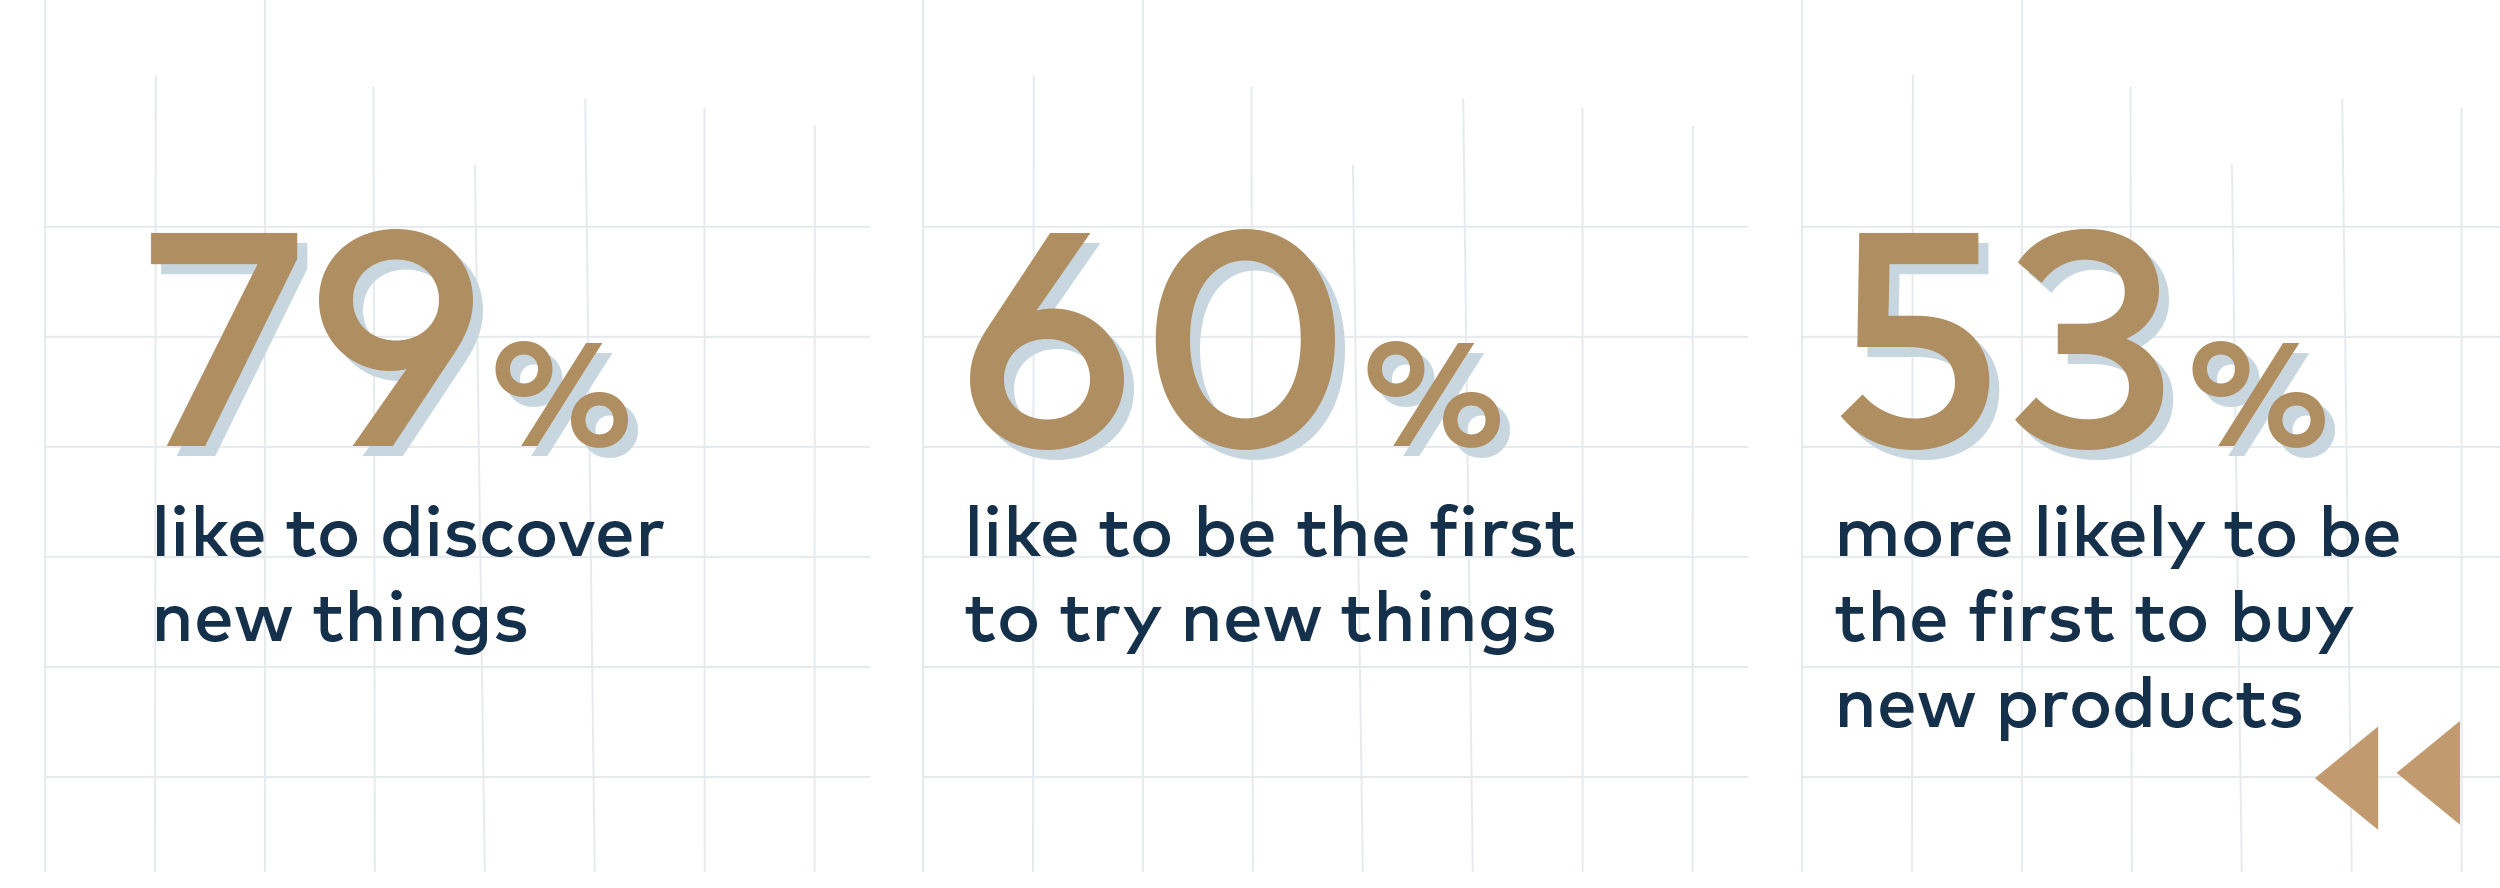 79% like to discover new things. 60% like to be the first to try new things. 53% more likely to be the first to buy new products.